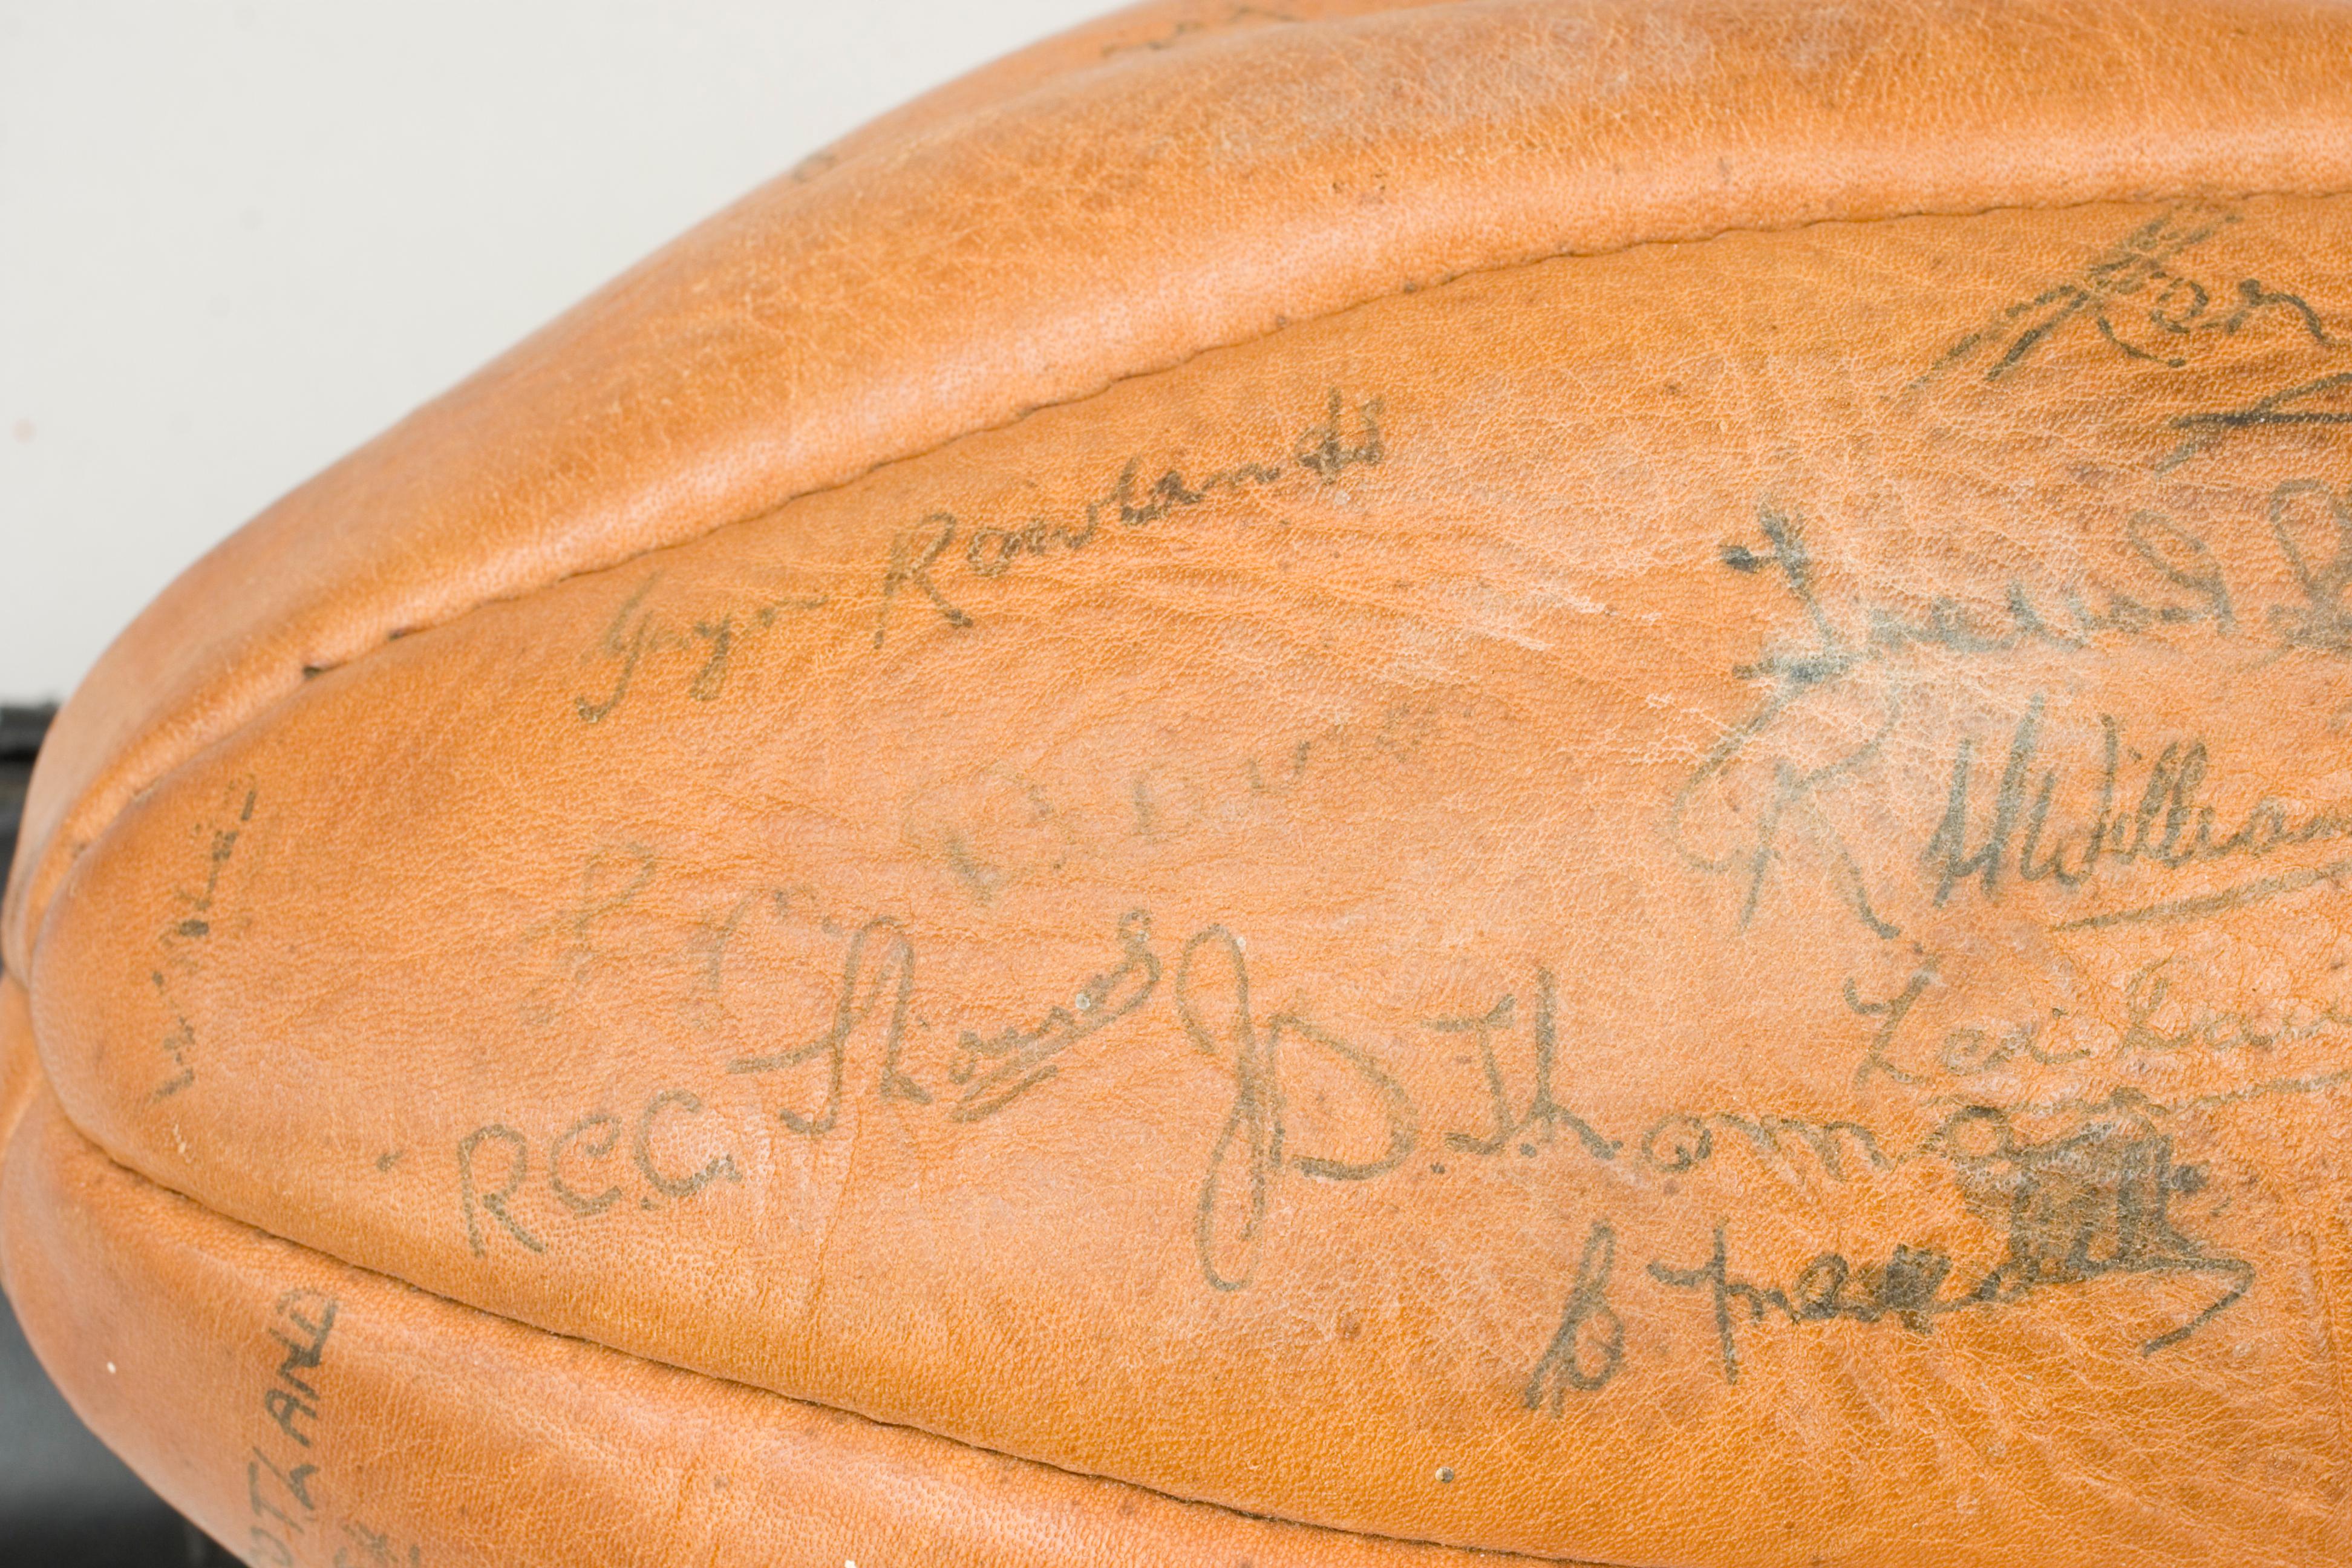 Sykes Rugby Ball, Signed by 1954 England, Scotland, Wales & Ireland Rugby Teams 6